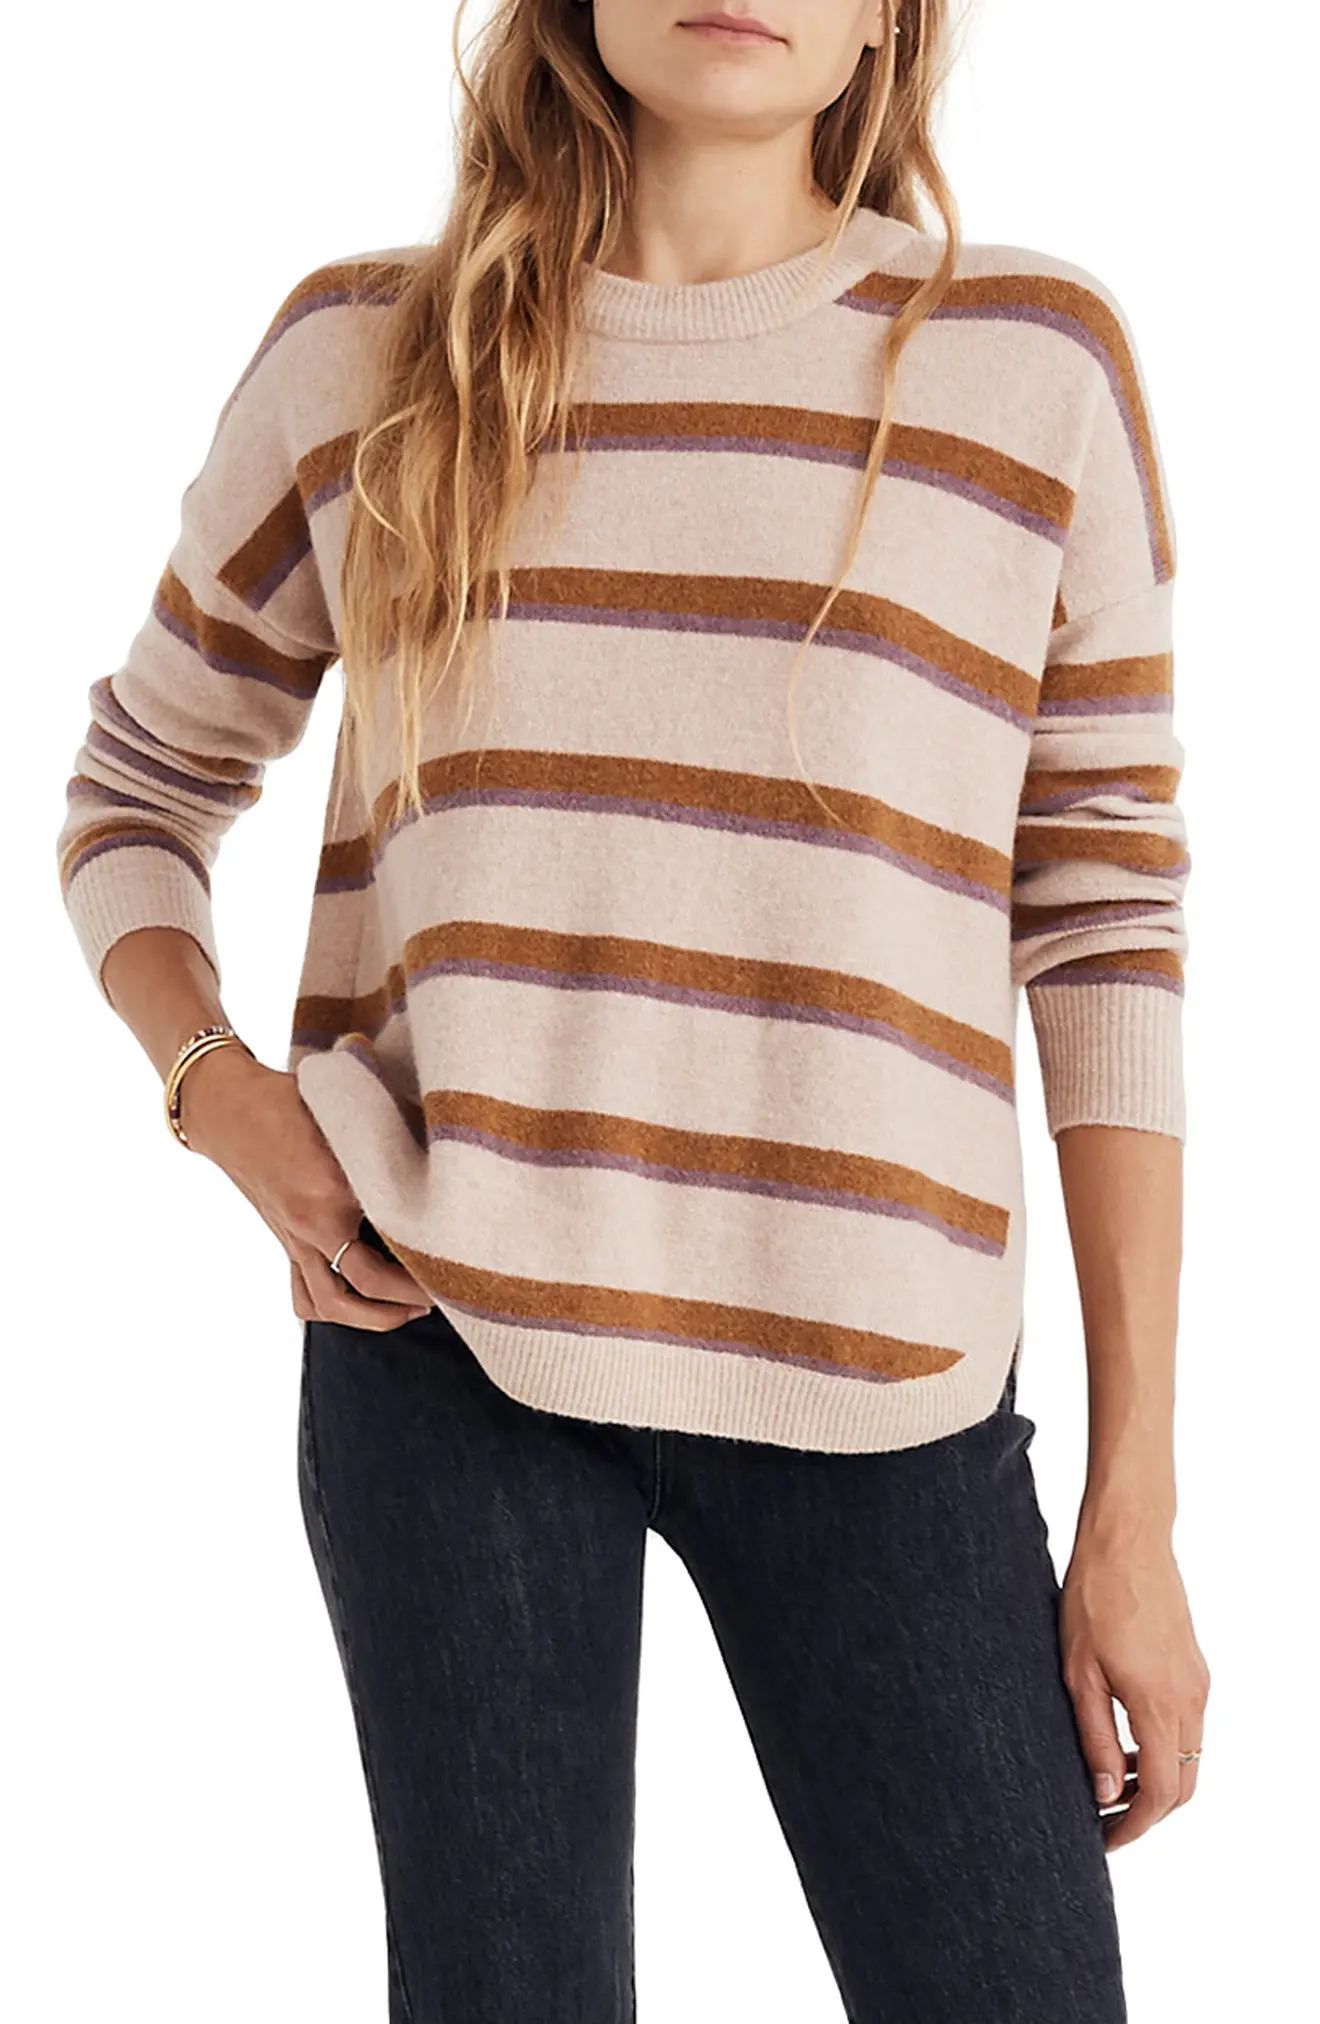 Madewell Westlake Striped Pullover Sweater in Coziest Yarn (Regular & Plus Size) | Nordstrom